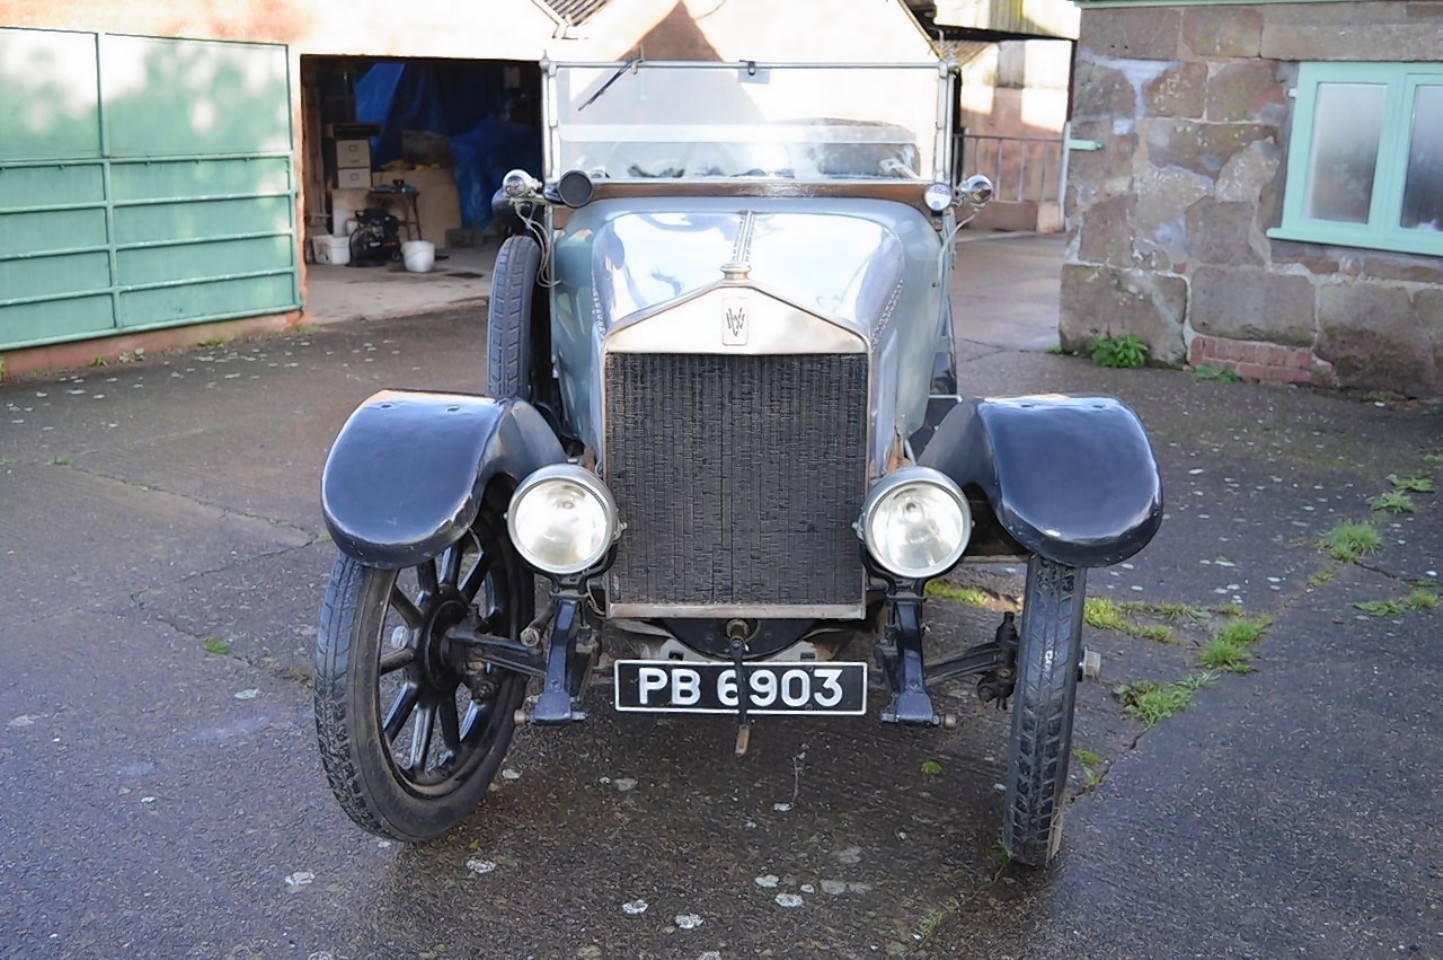 The 1920 Varley Woods four-seater tourer